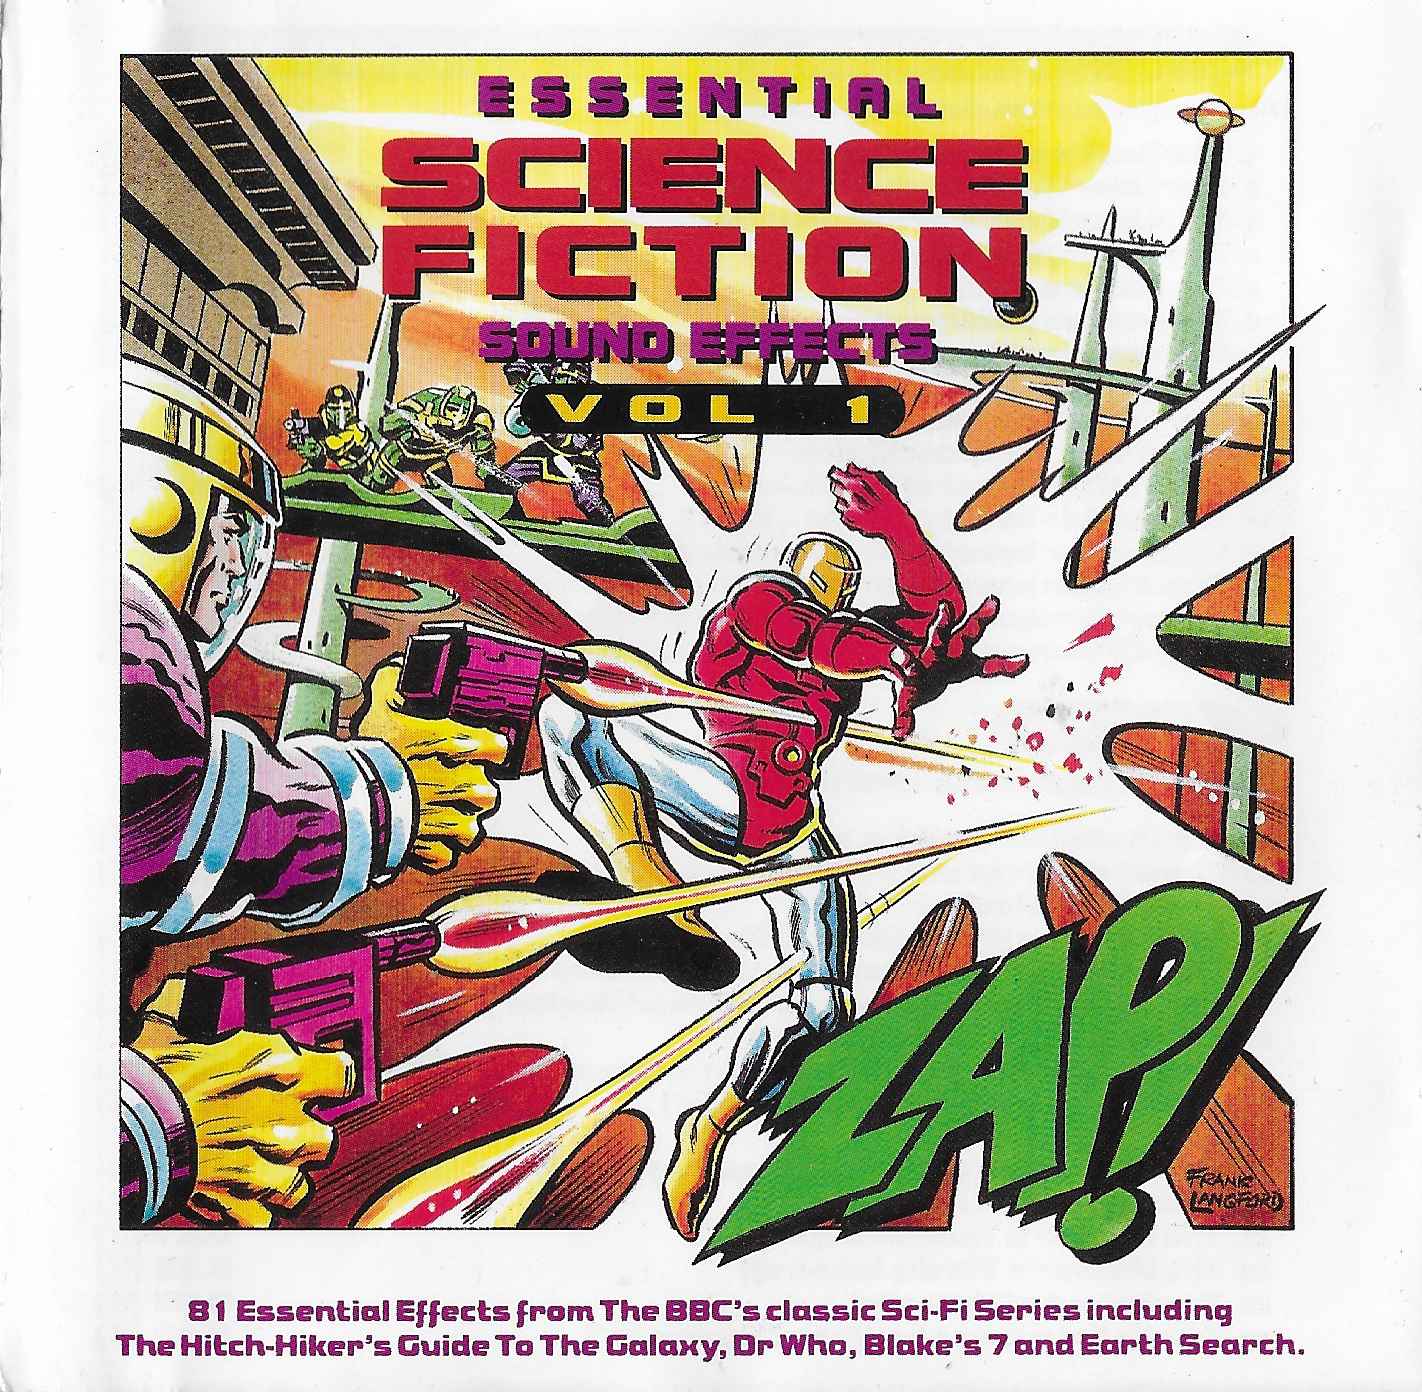 Picture of Essential science-fiction sound effects - Volume 1 by artist BBC radiophonic workshop from the BBC cds - Records and Tapes library